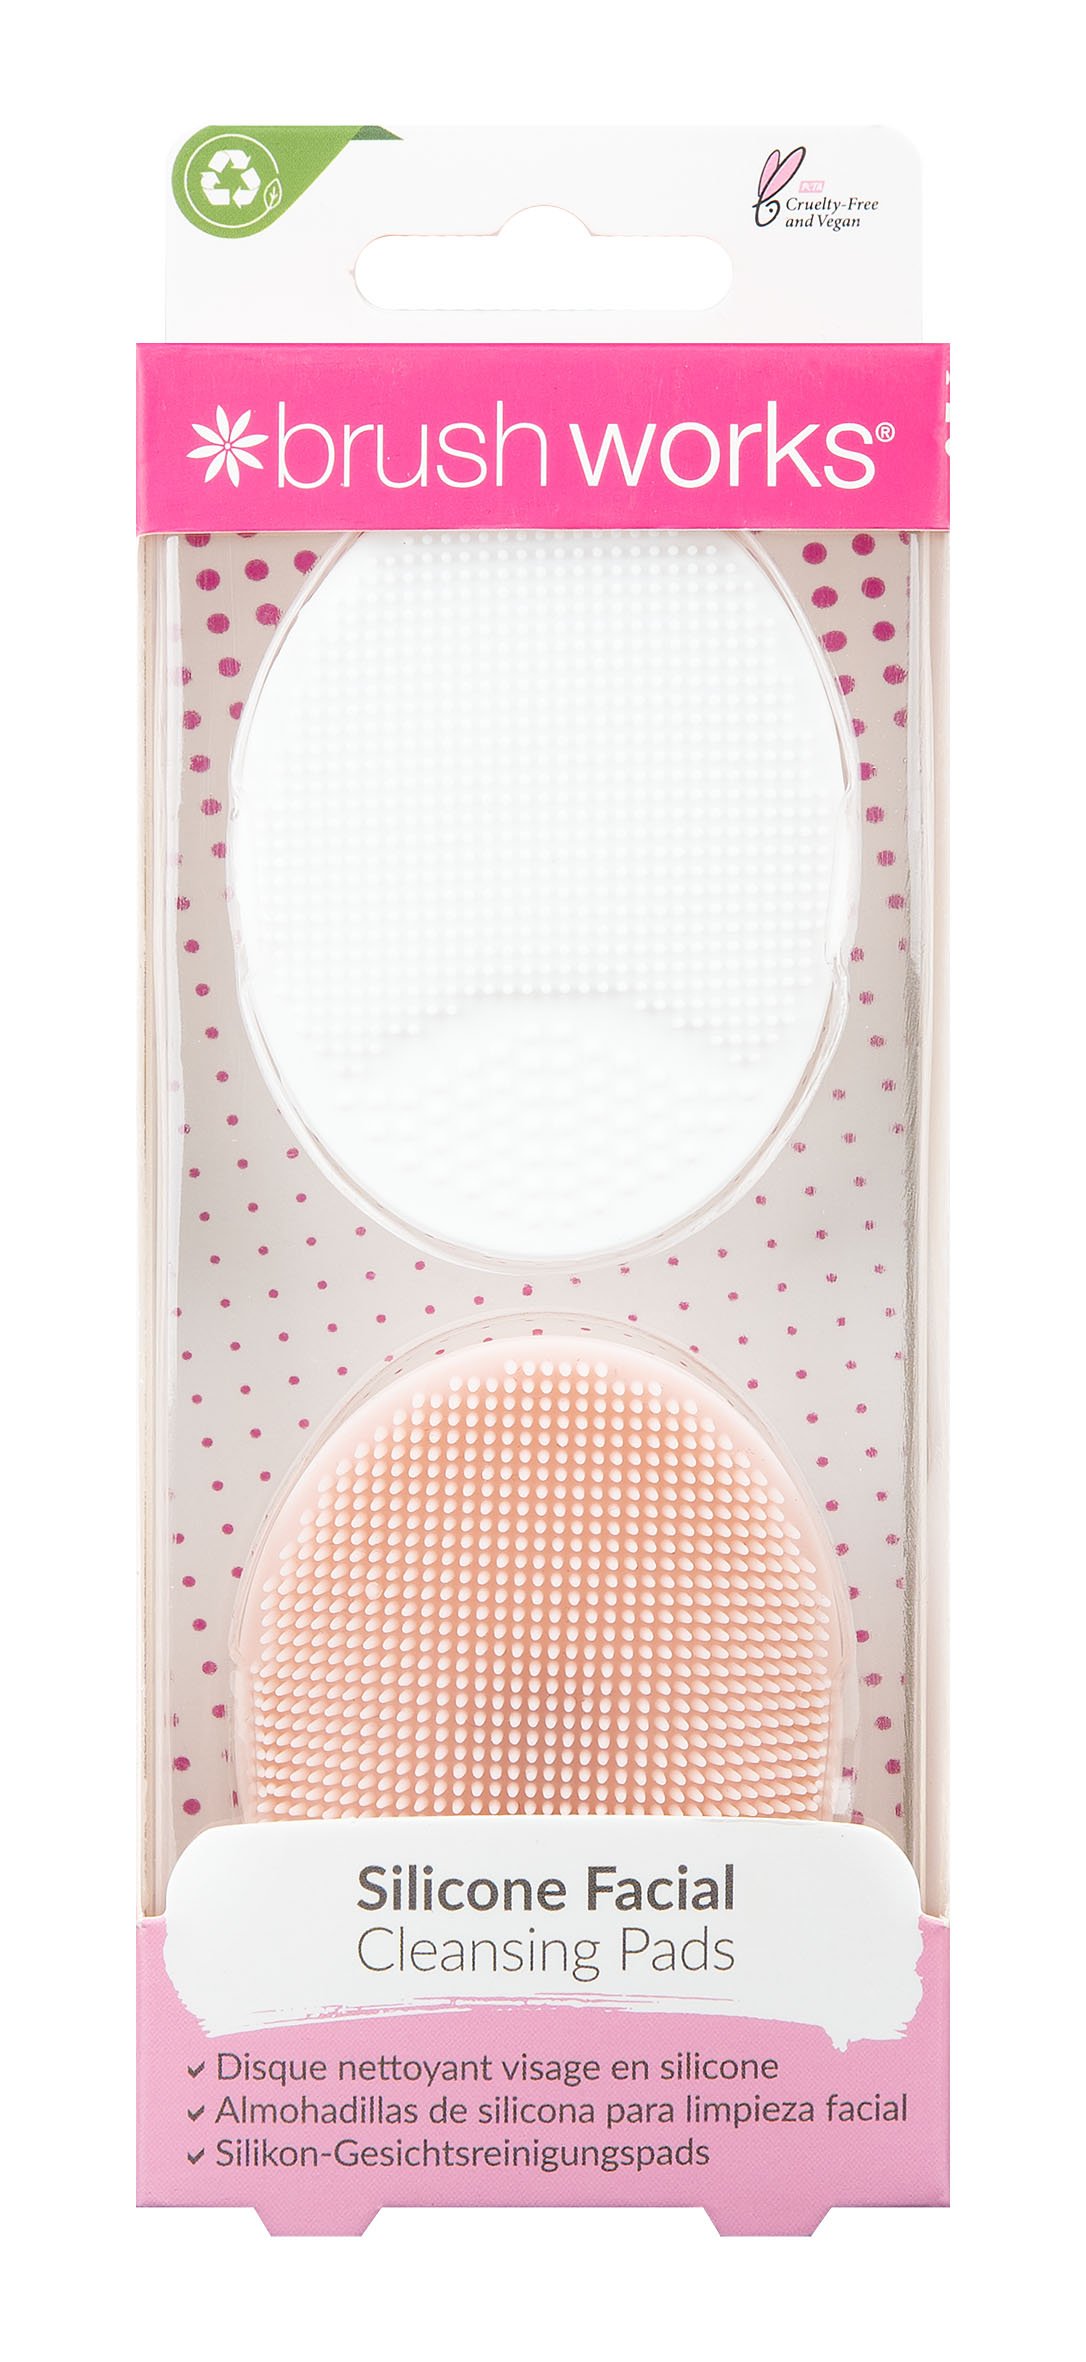 Brushworks Silicone Facial Cleansing Pads, 2 stk